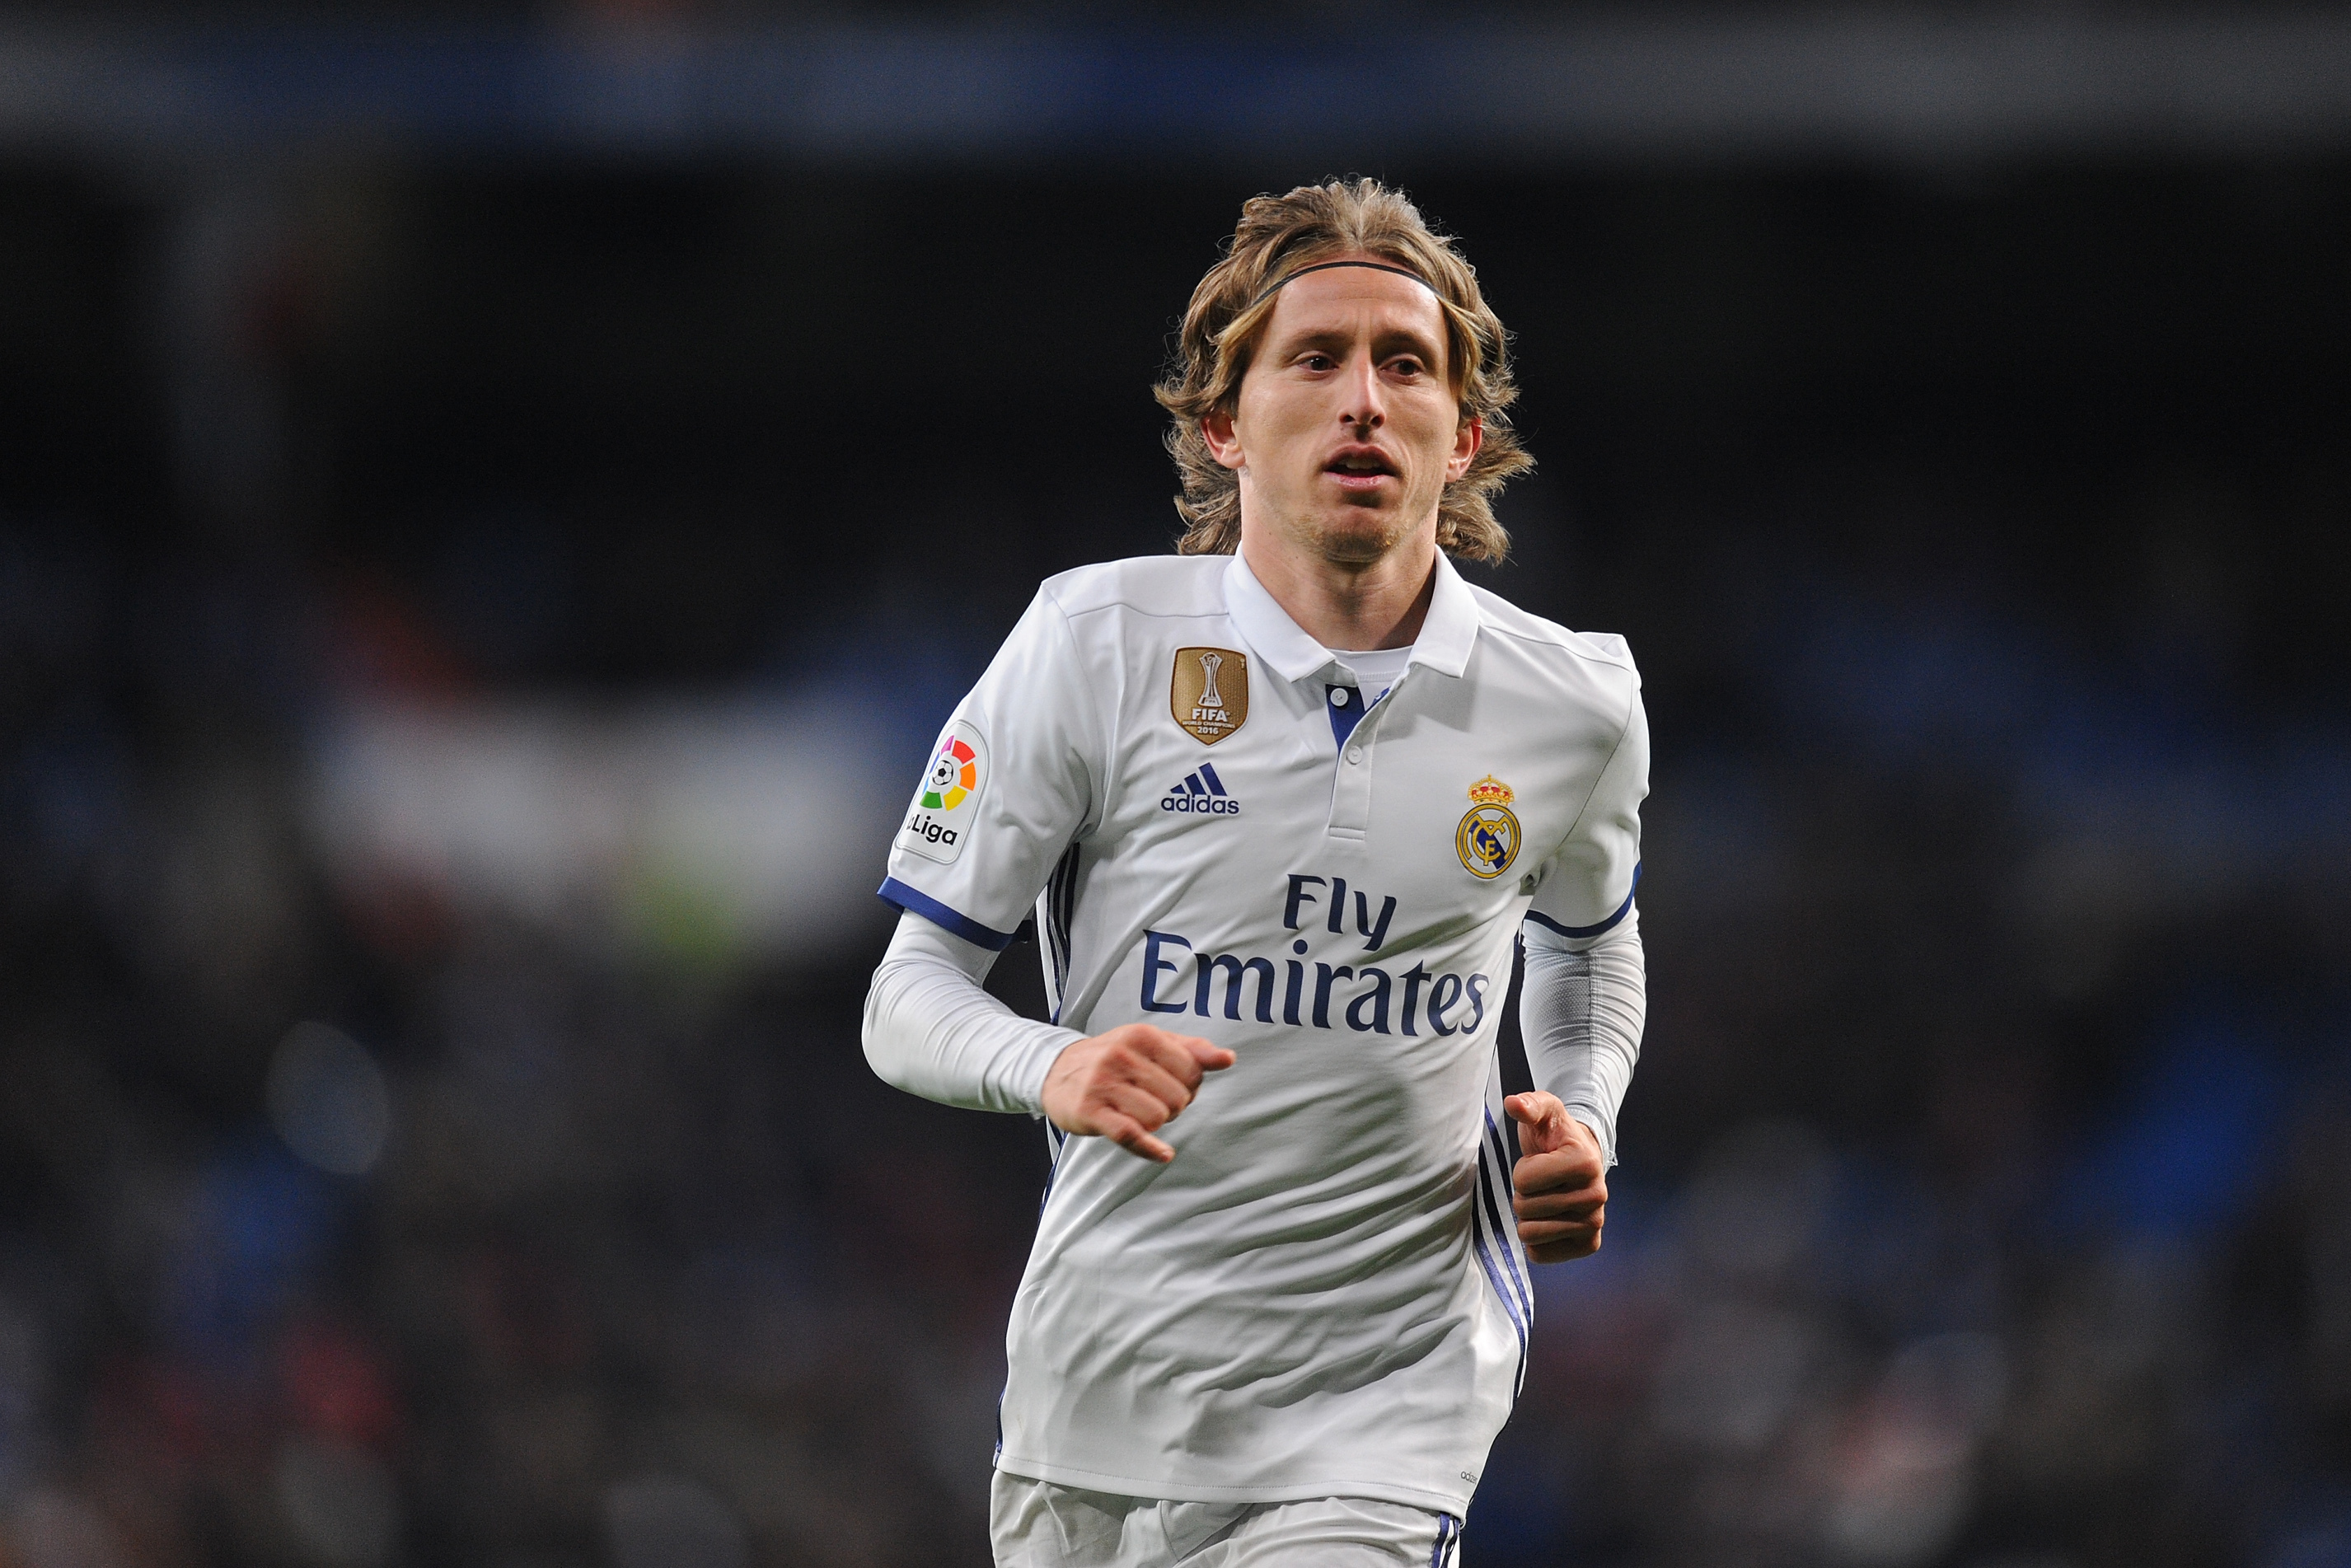 How much injuries will you got?madrid:yes #fyp #foryou #foryoupage #lu, luka modric